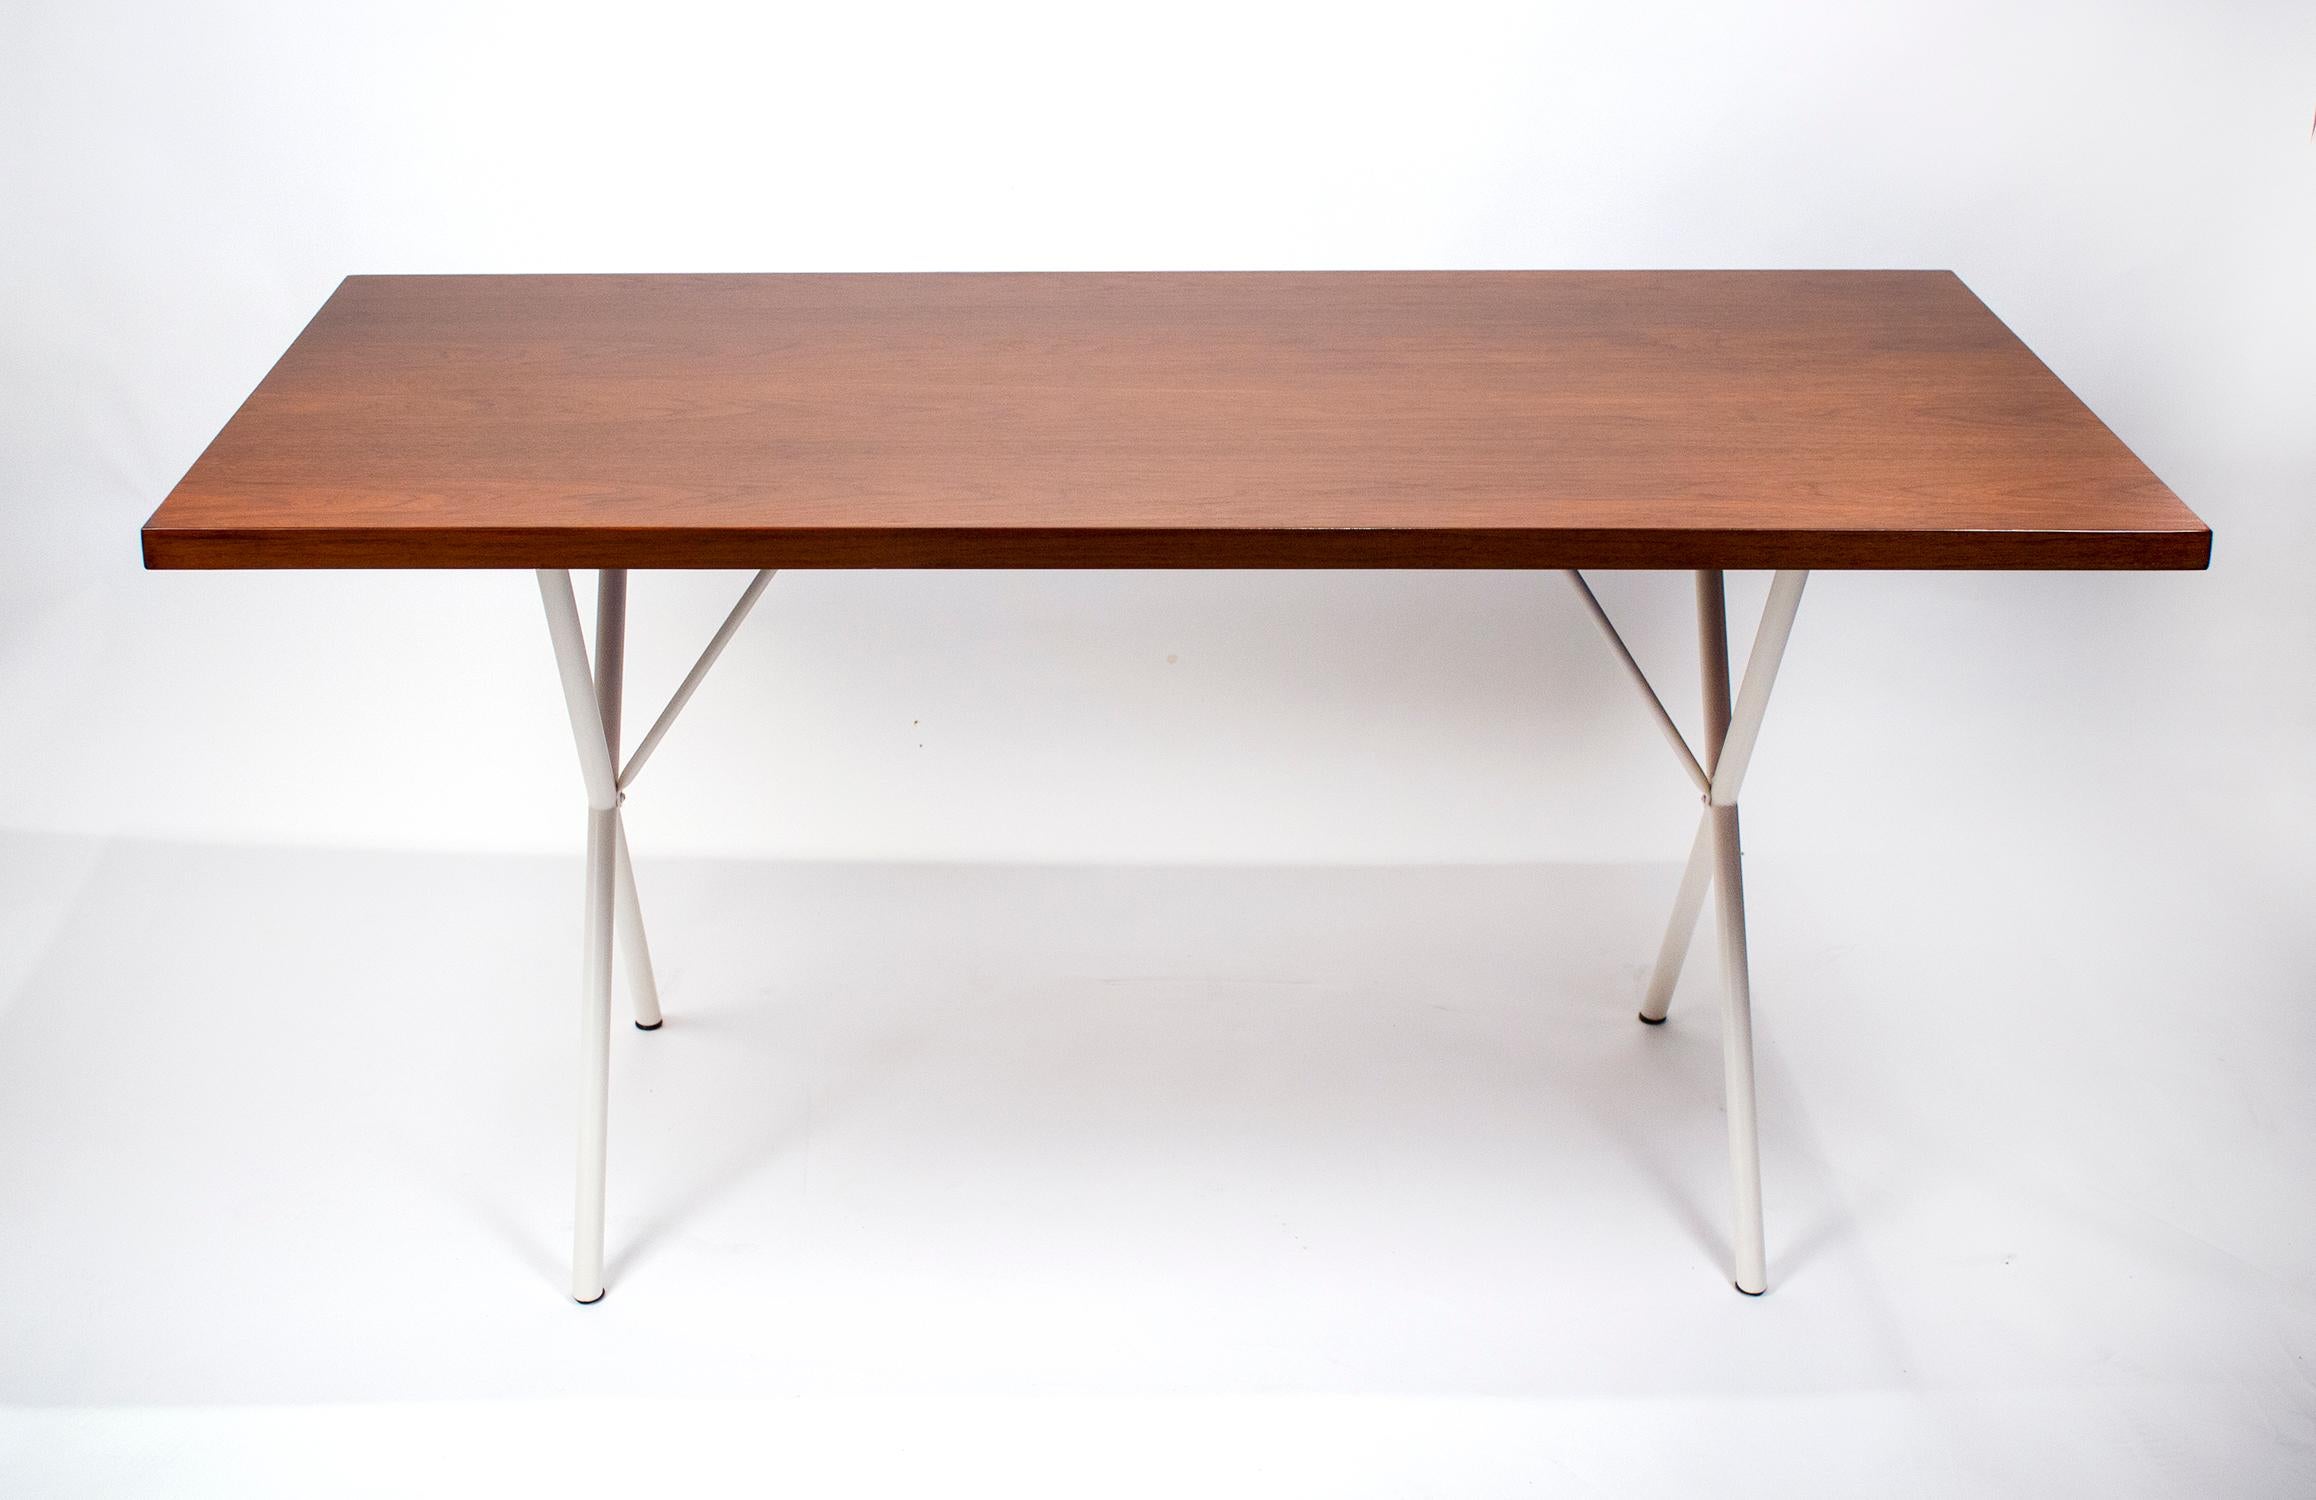 Early production table/desk designed by George Nelson, 1955. This design is very versatile and can function as a desk, an additional work surface, or a dining table. The desk has the original walnut top with lacquered X-base legs and was produced by